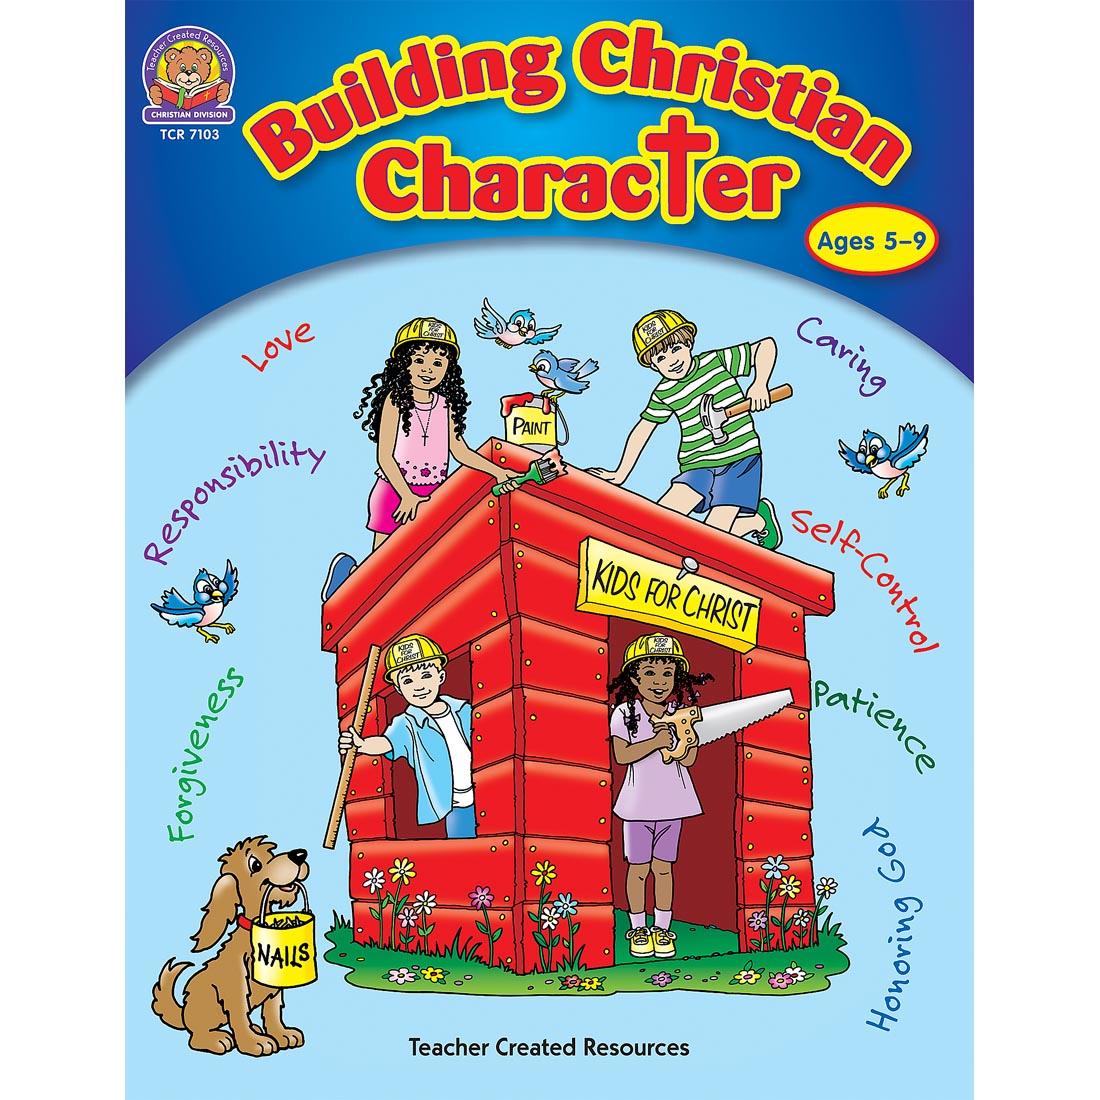 Building Christian Character by Teacher Created Resources